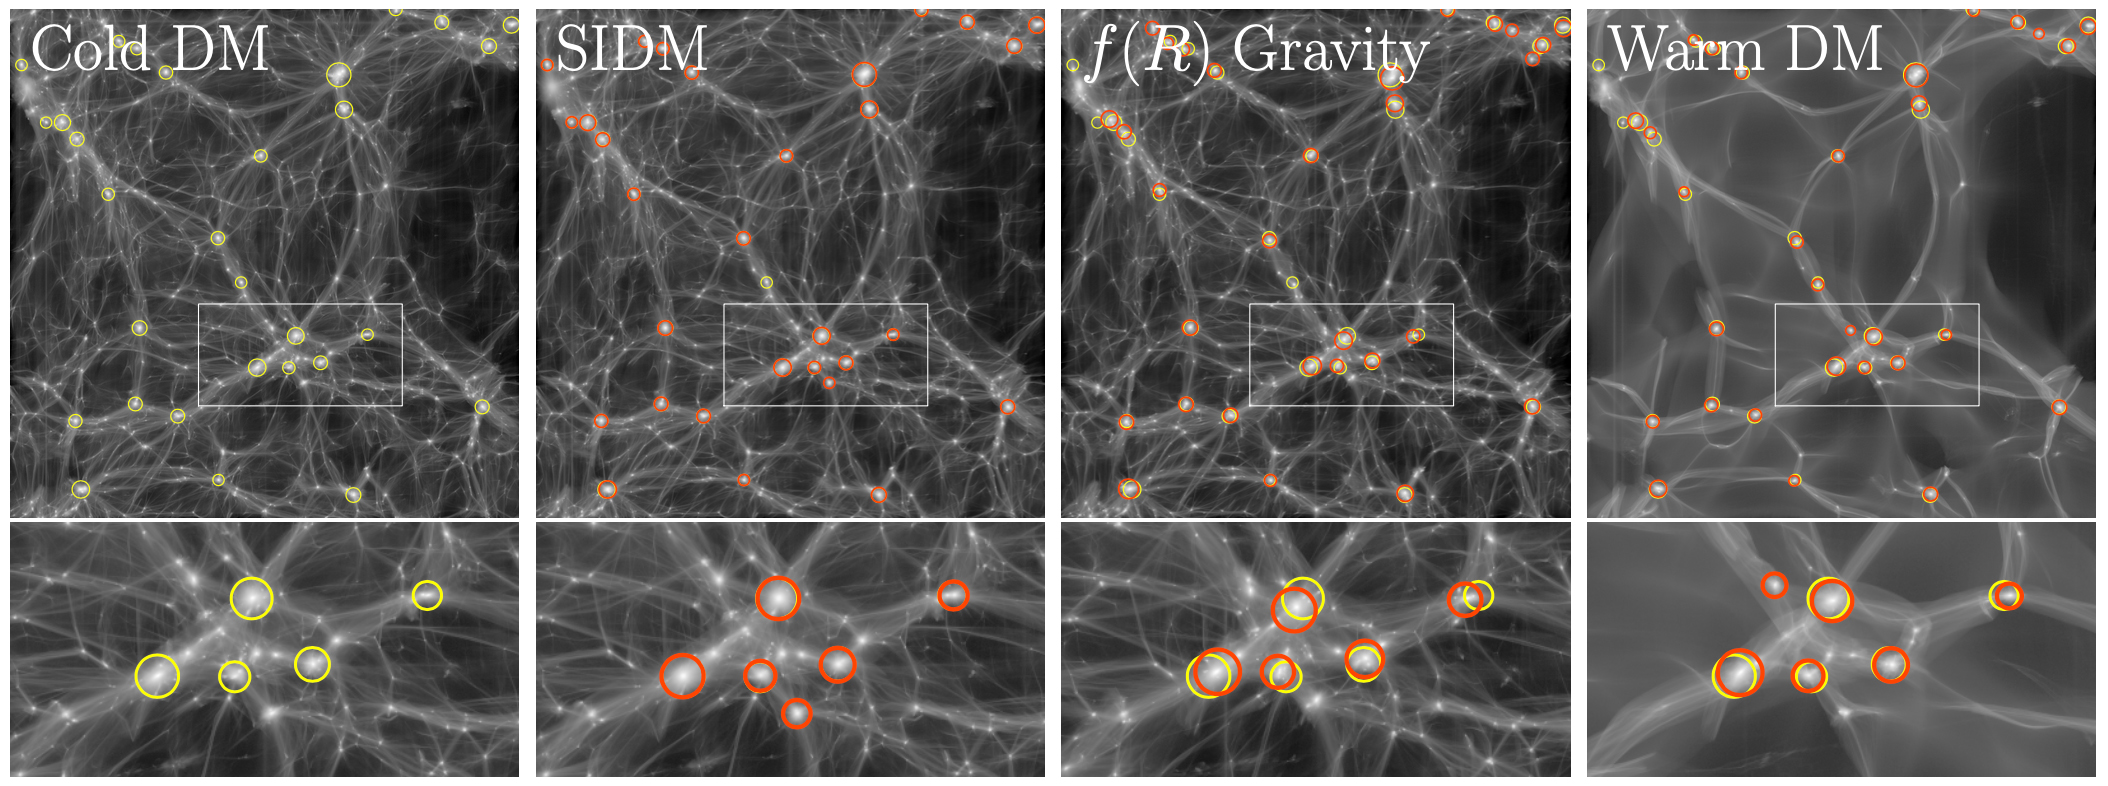 "A model showing the web-like structure of dark matter"